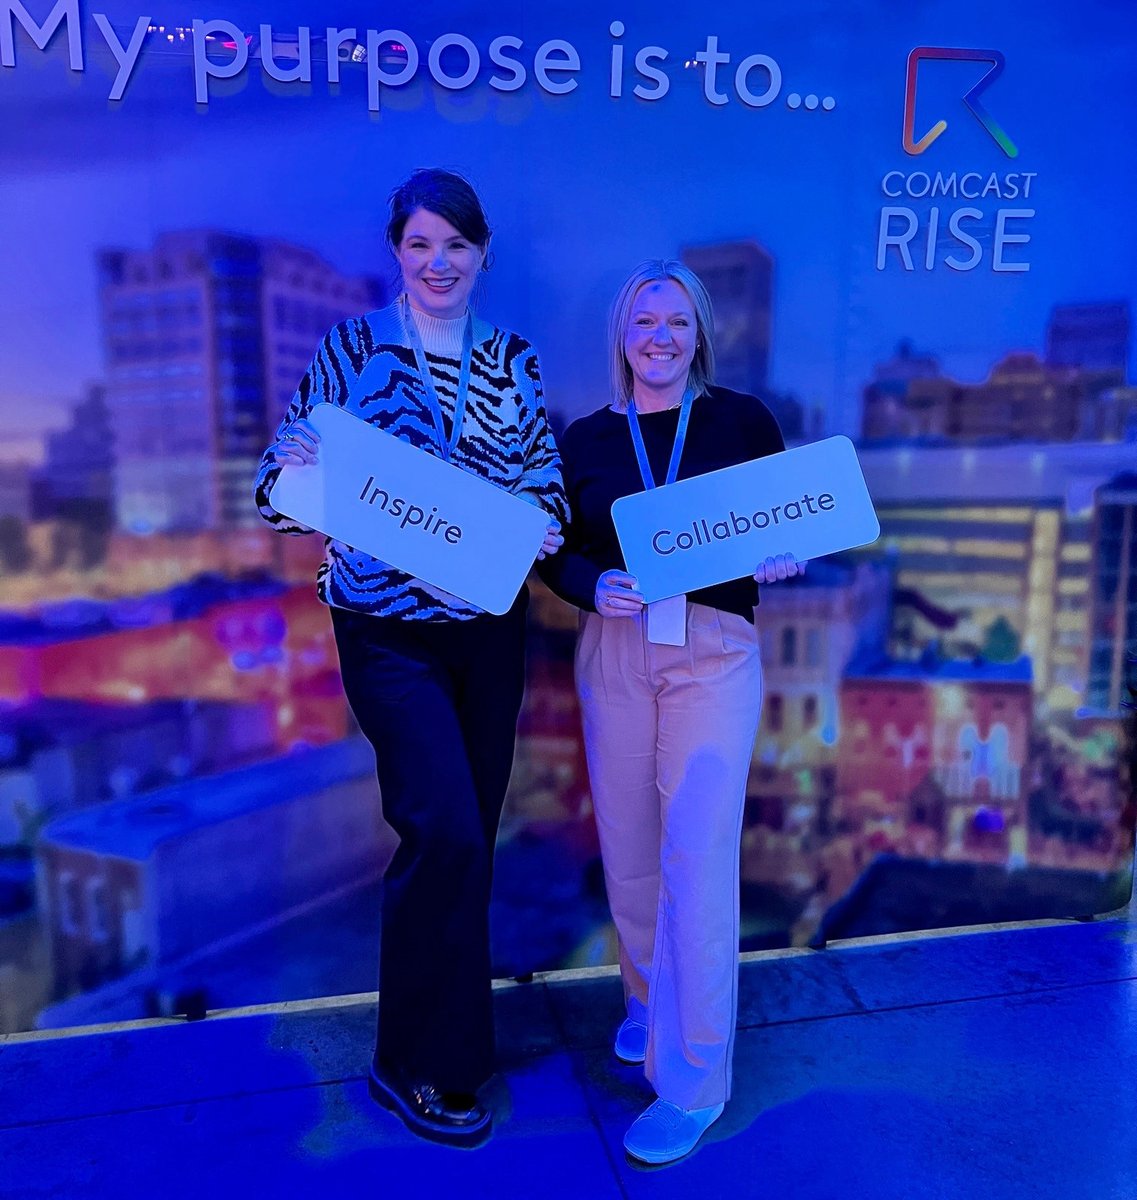 On Thursday, November 2 MiCare Path was honored at #ComcastRiseDay at the Stratford Event Center with all the prestigious #ComcastRise Grant recipients. 
Thank you to Comcast Rise for believing in the #MiCarePath vision. 
#rpm #rtm #caremanagement #healthtech